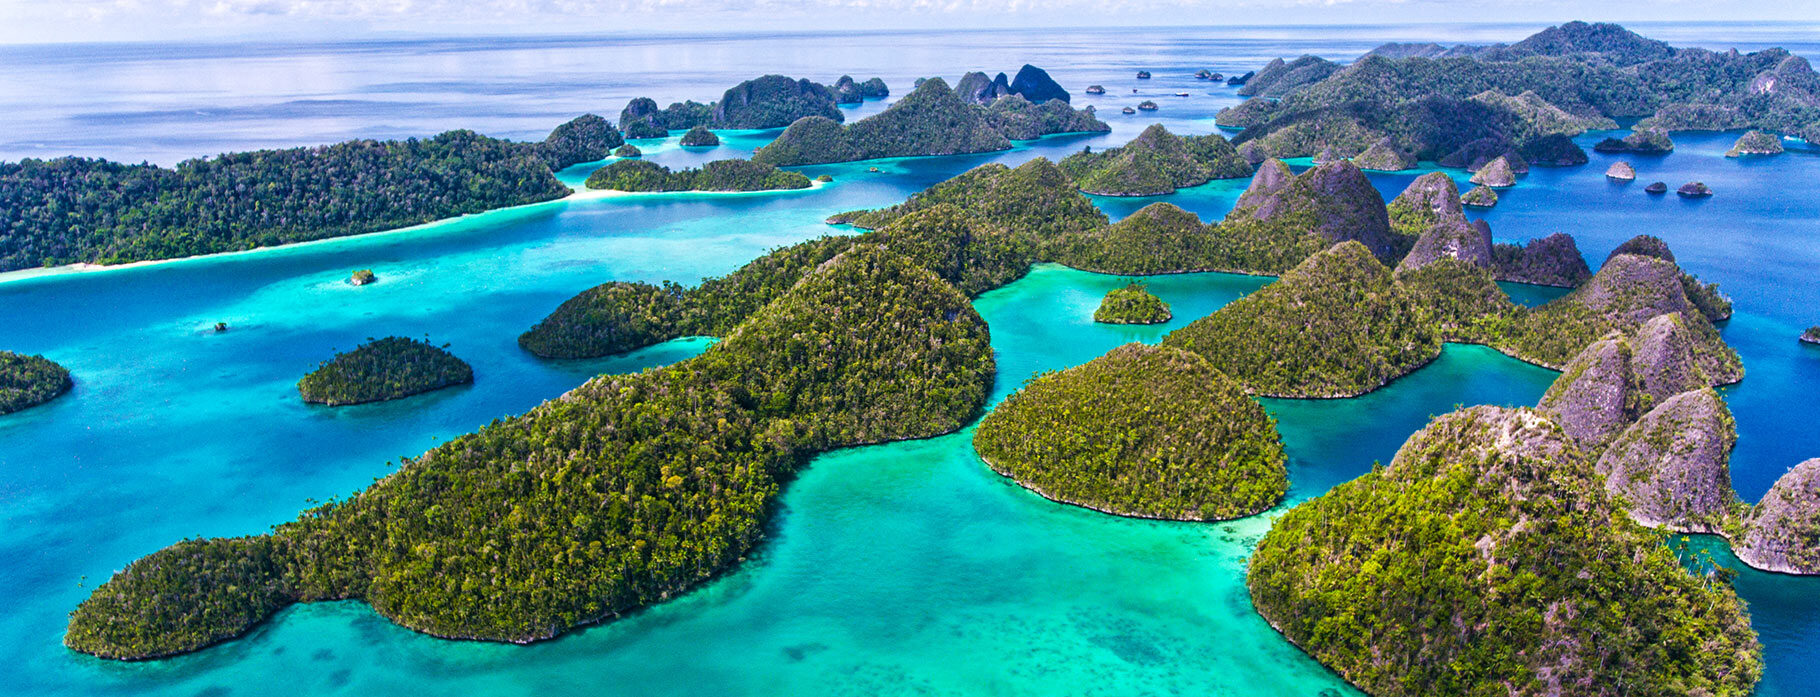 8 Days Sailing the Uncharted Raja Ampat in Style